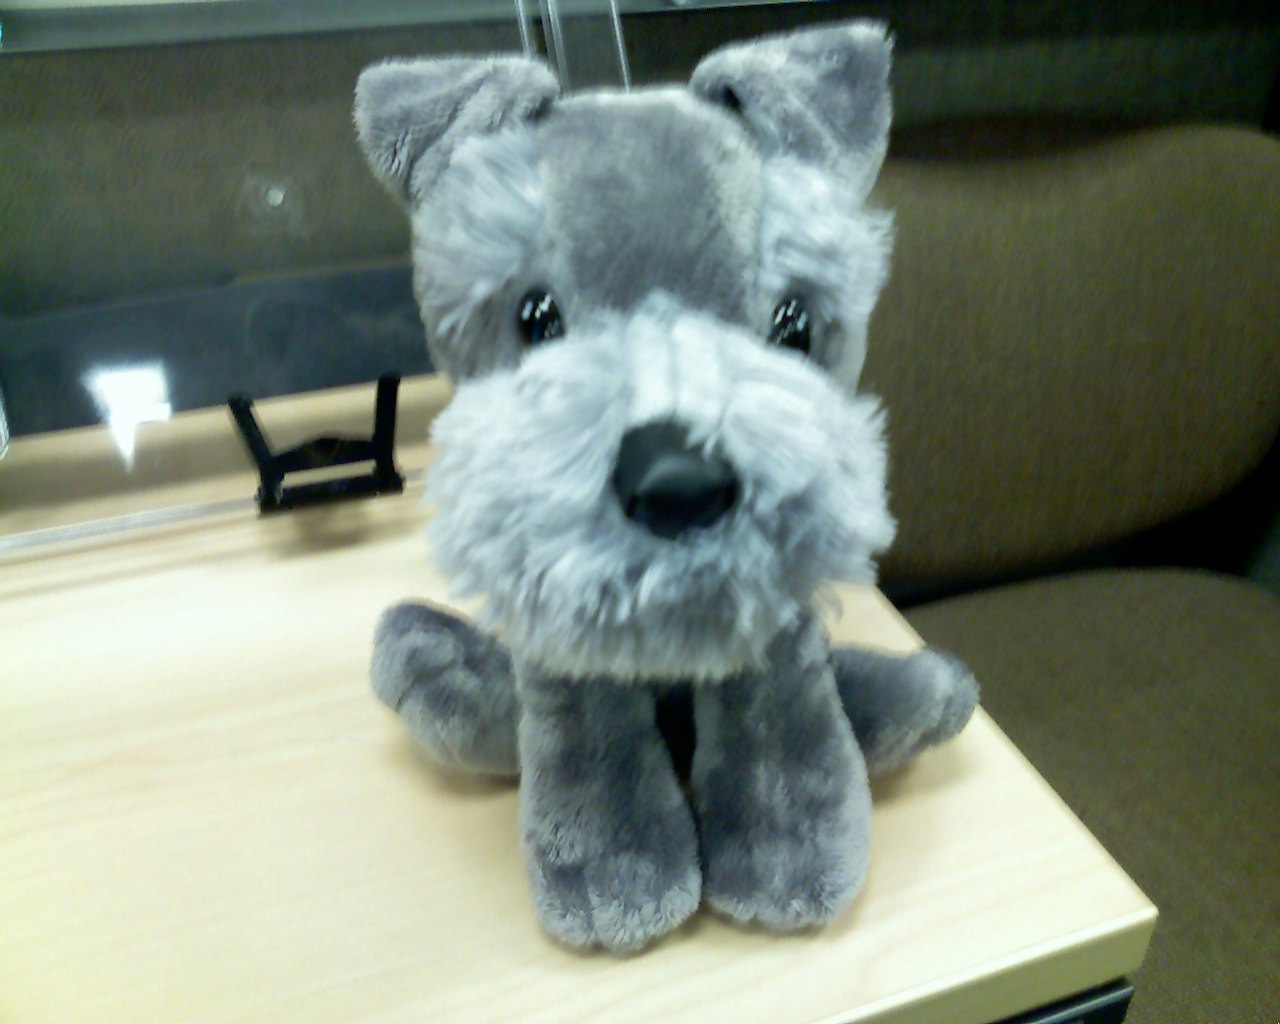 the gray dog has it's paw on top of the stuffed animal